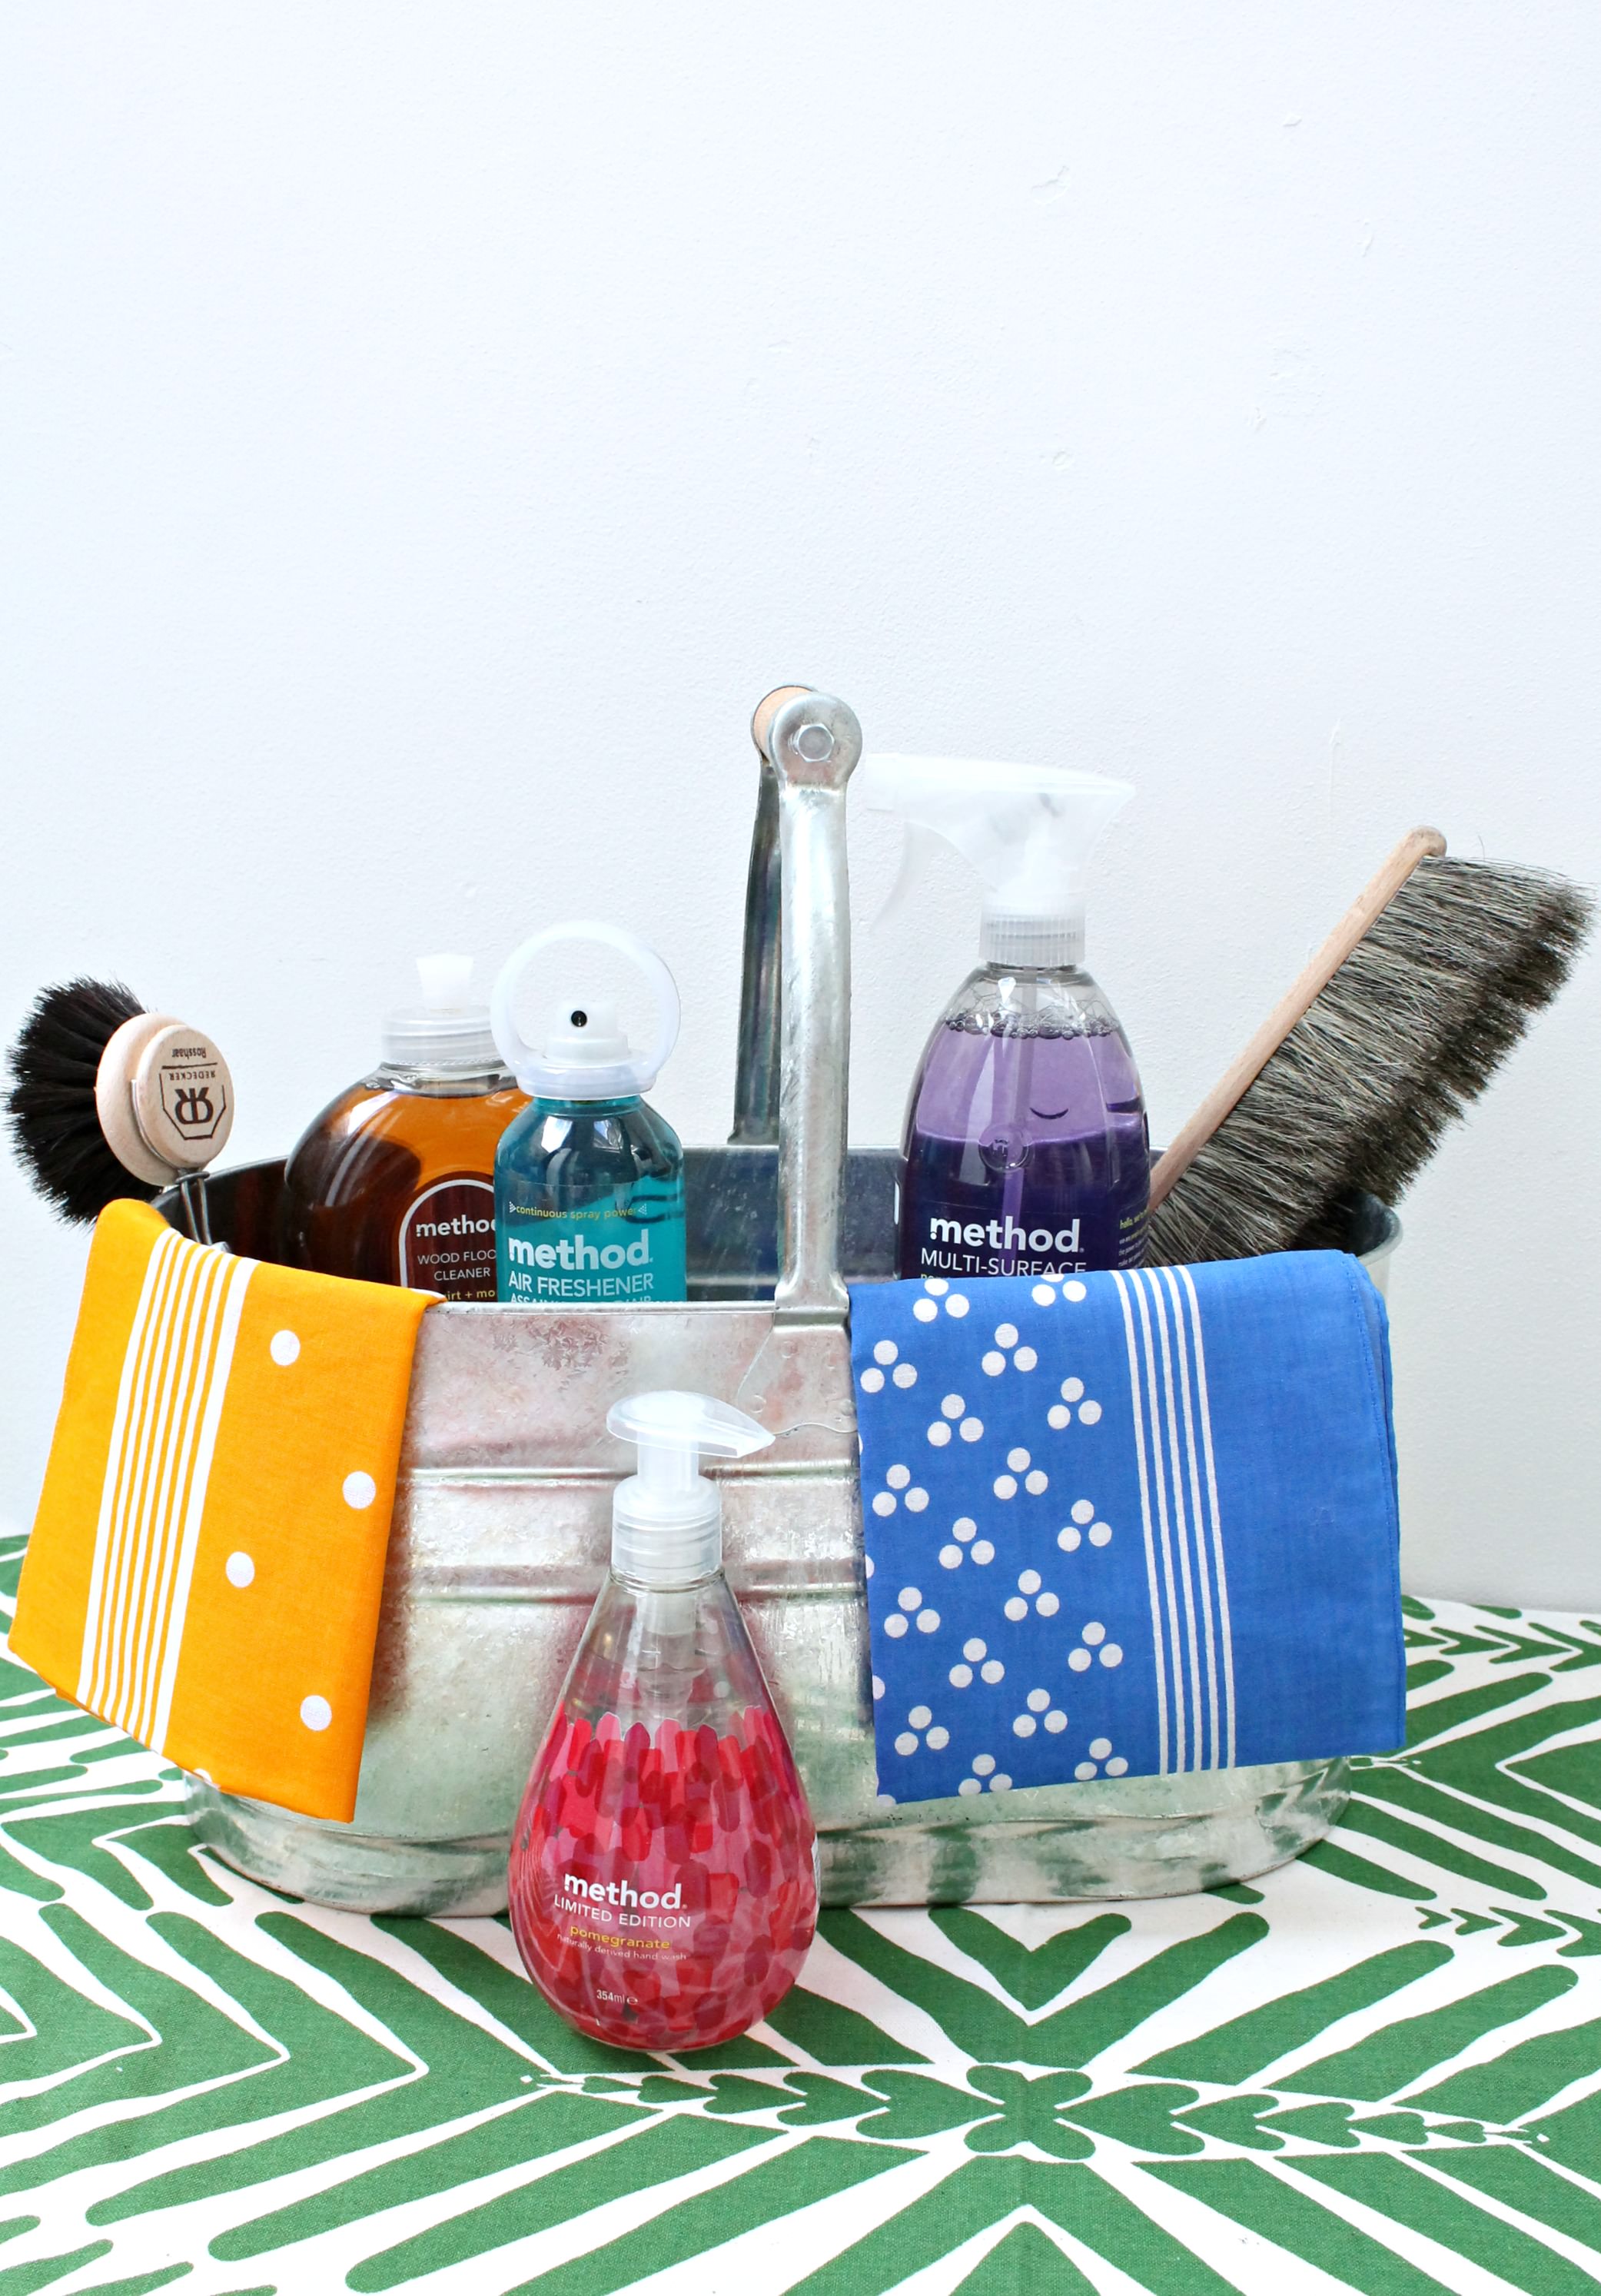 Method-cleaning-products-photo-by-Little-Big-Bell